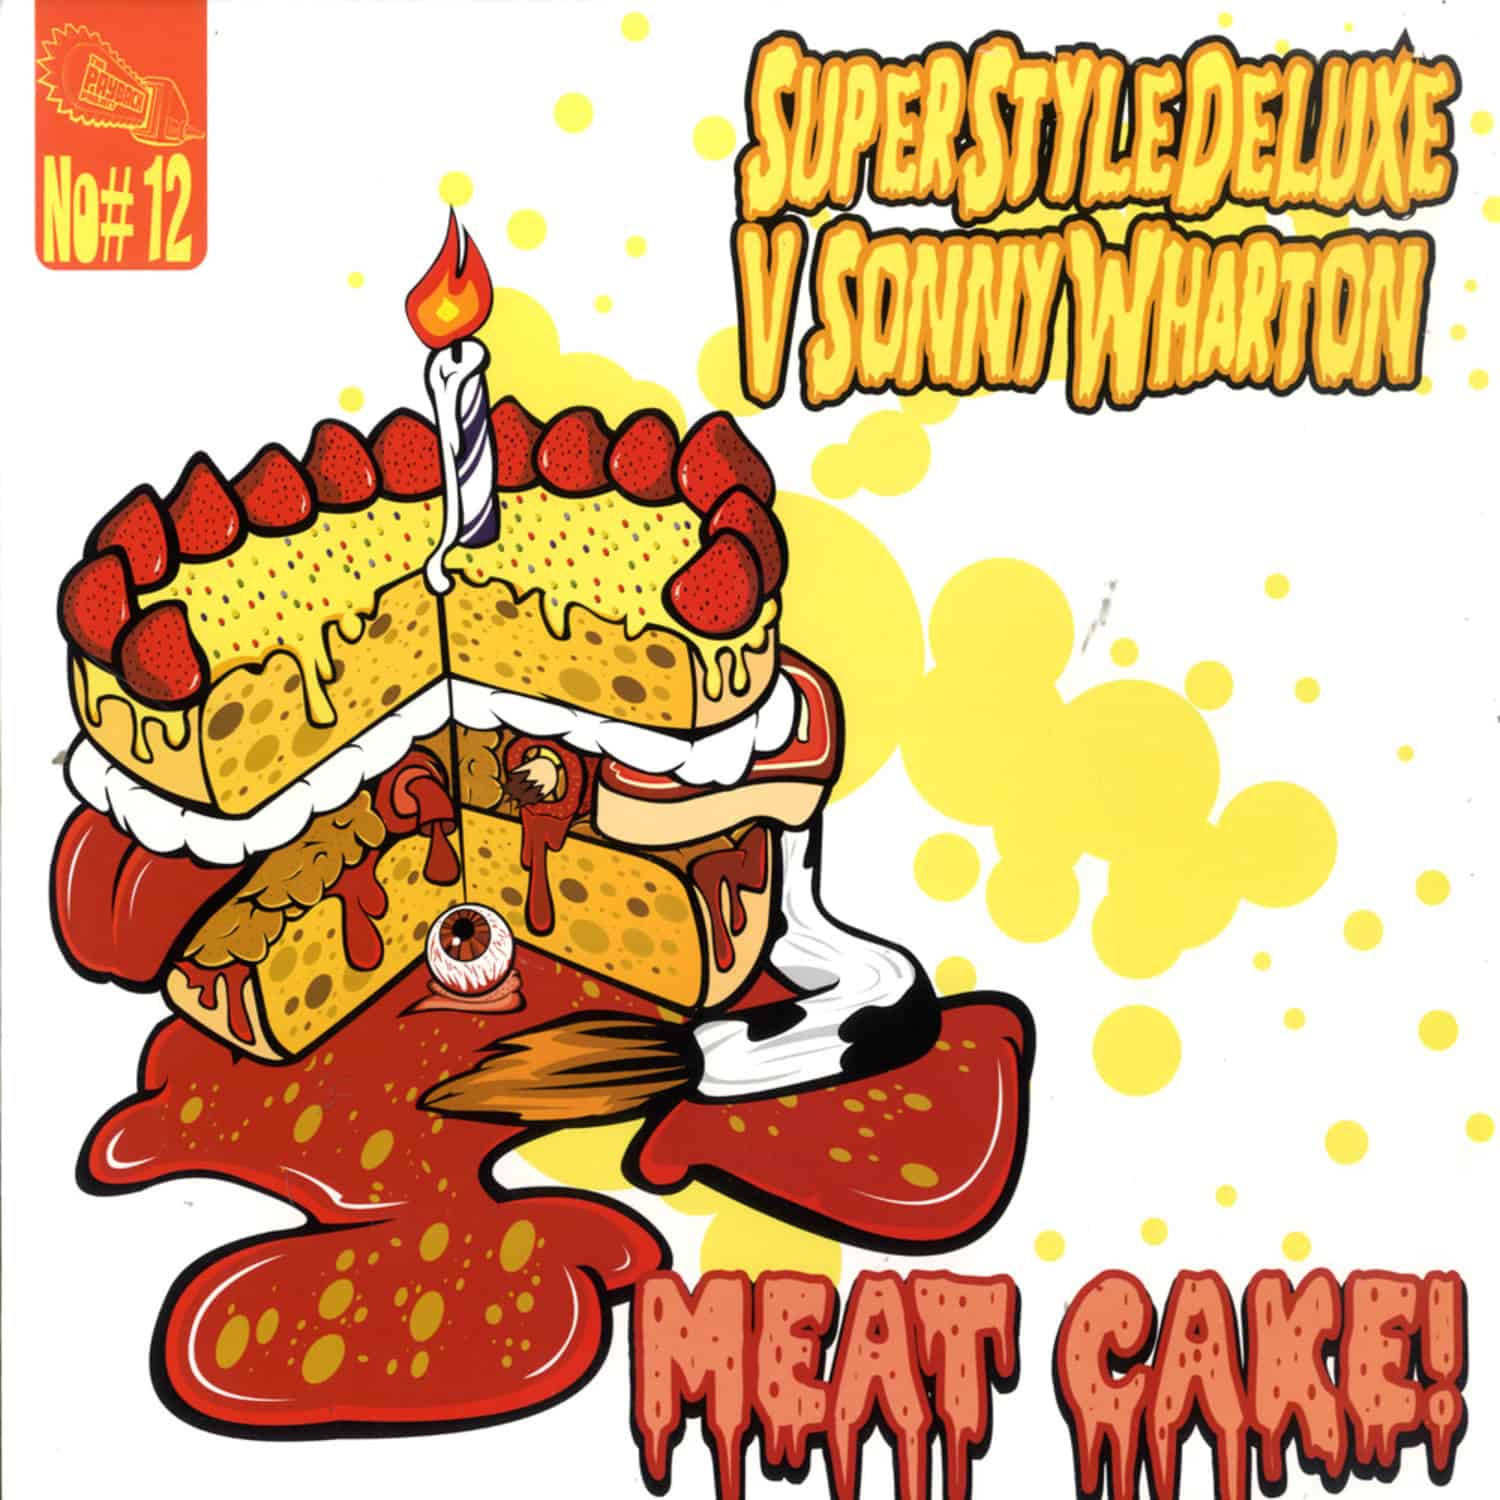 Superstyle Deluxe / Bassline - MEAT CAKE